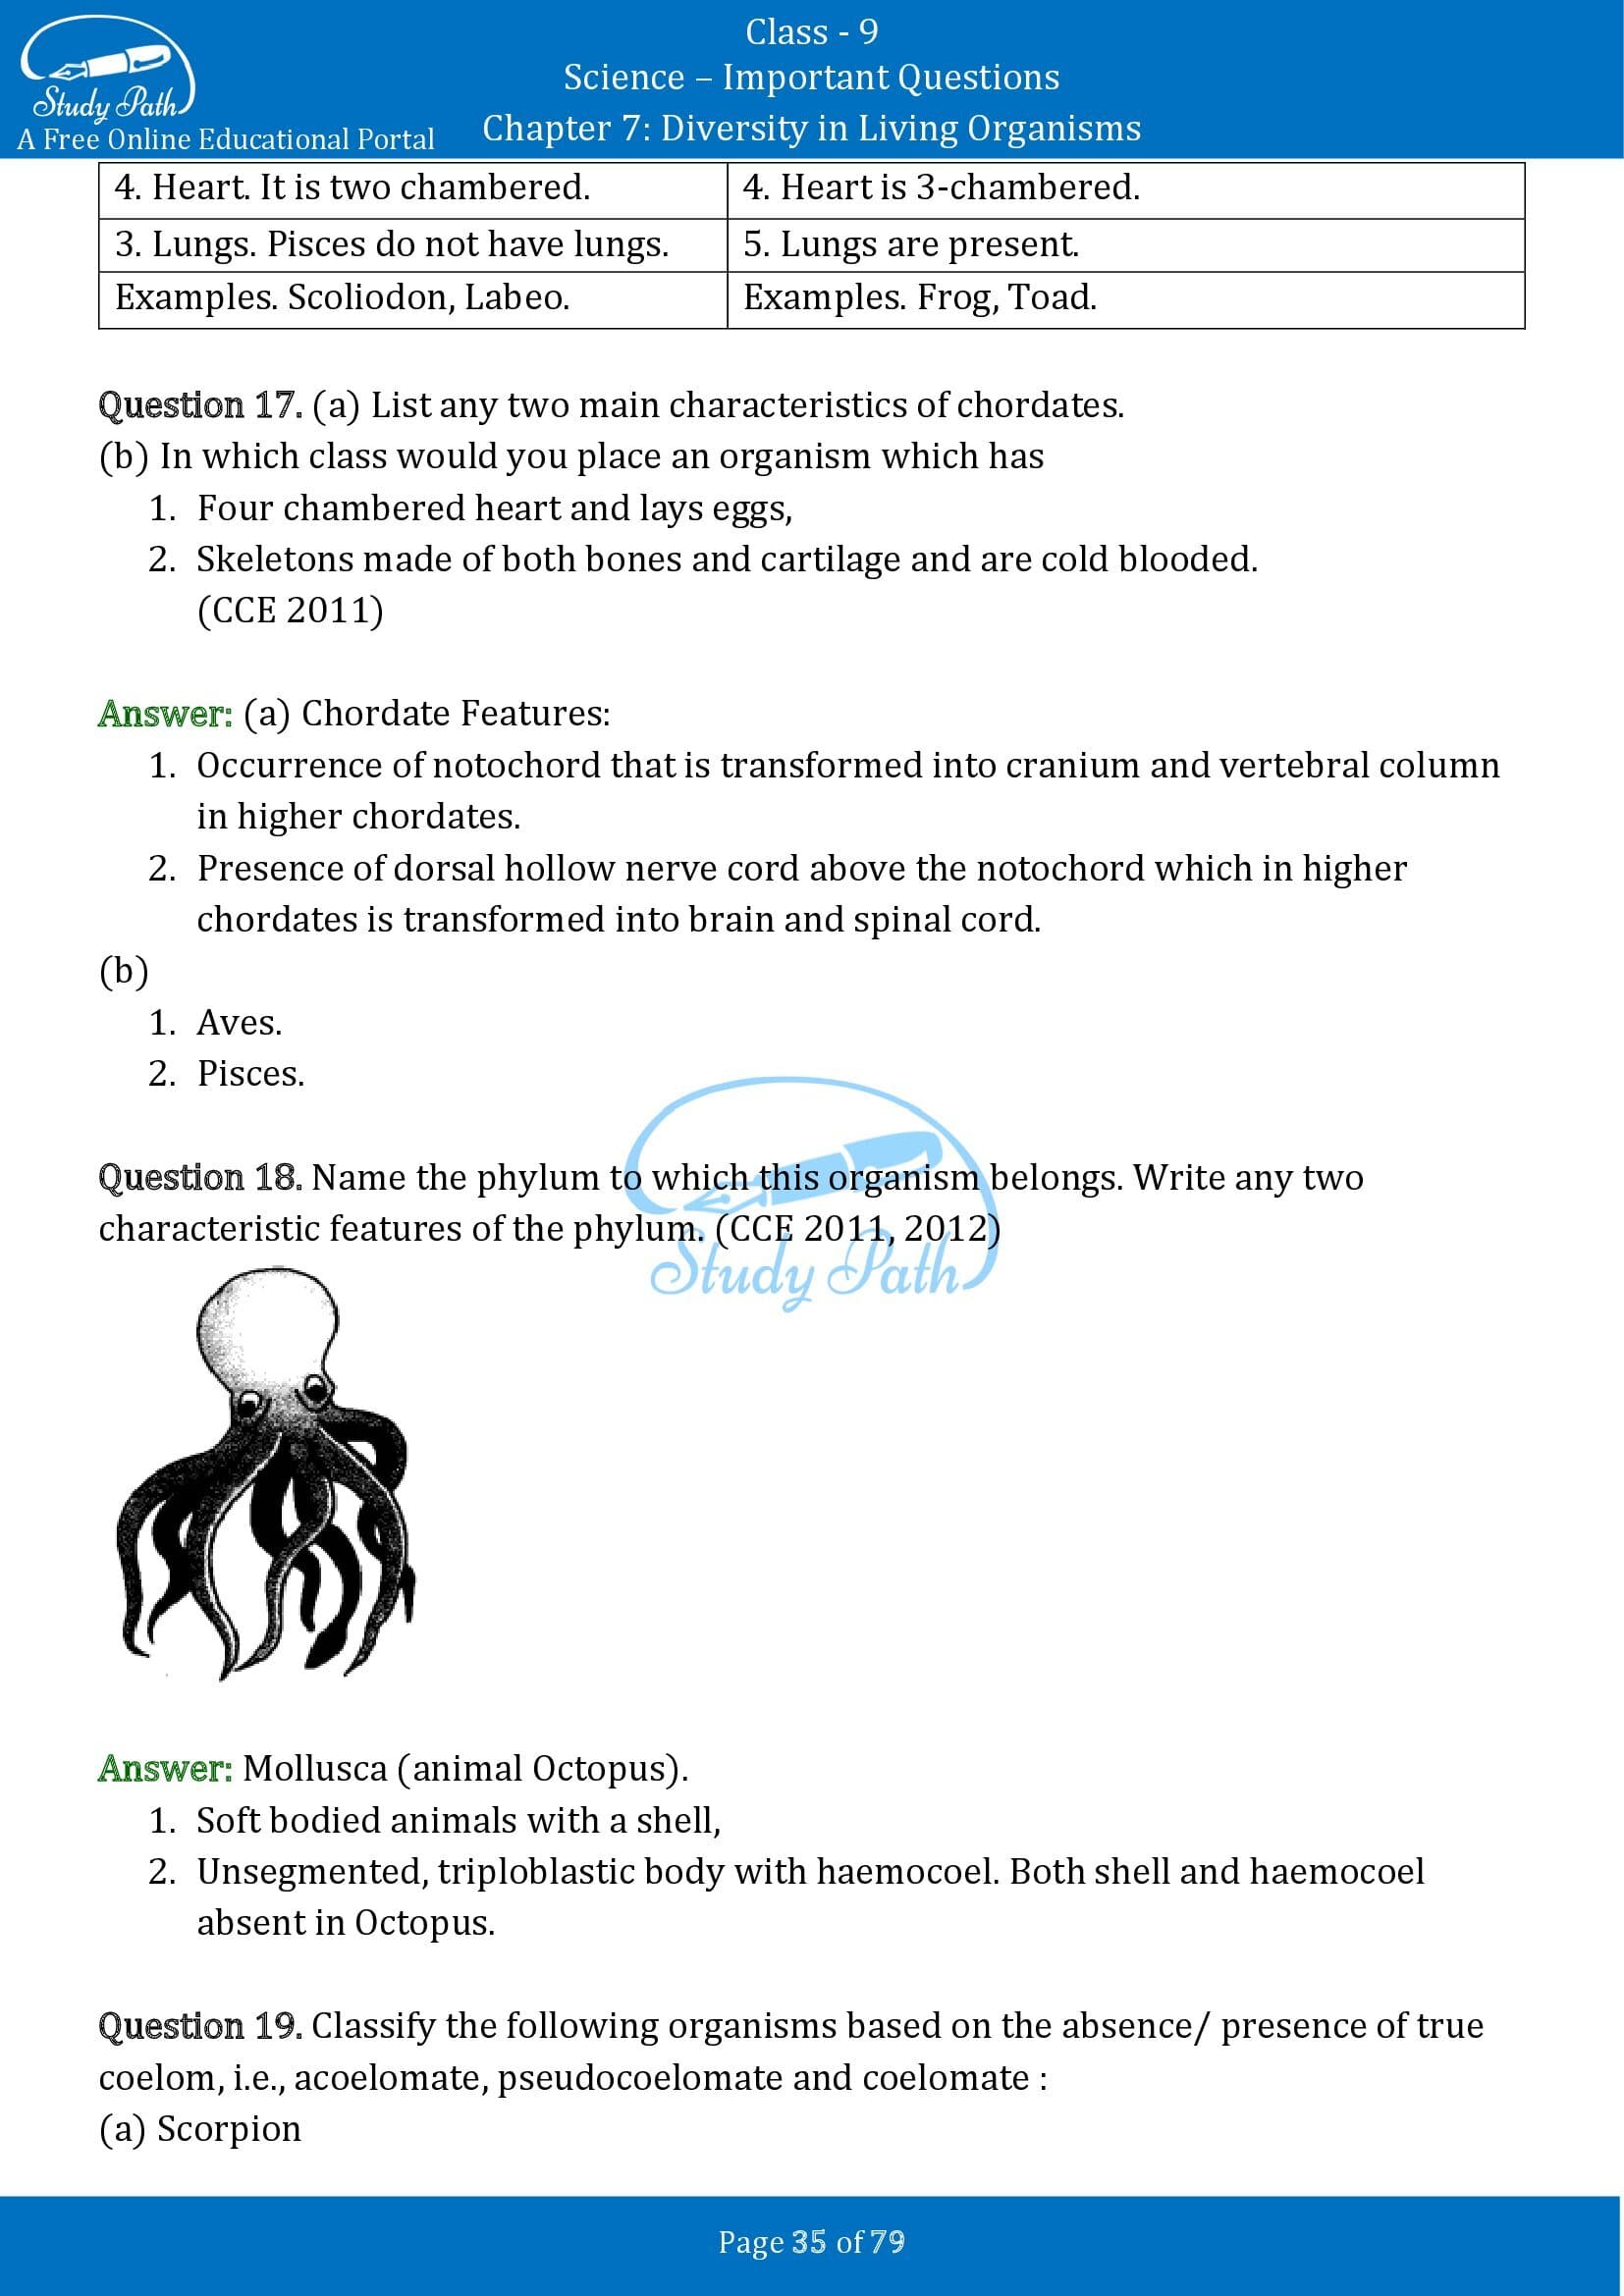 Important Questions for Class 9 Science Chapter 7 Diversity in Living Organisms 00035